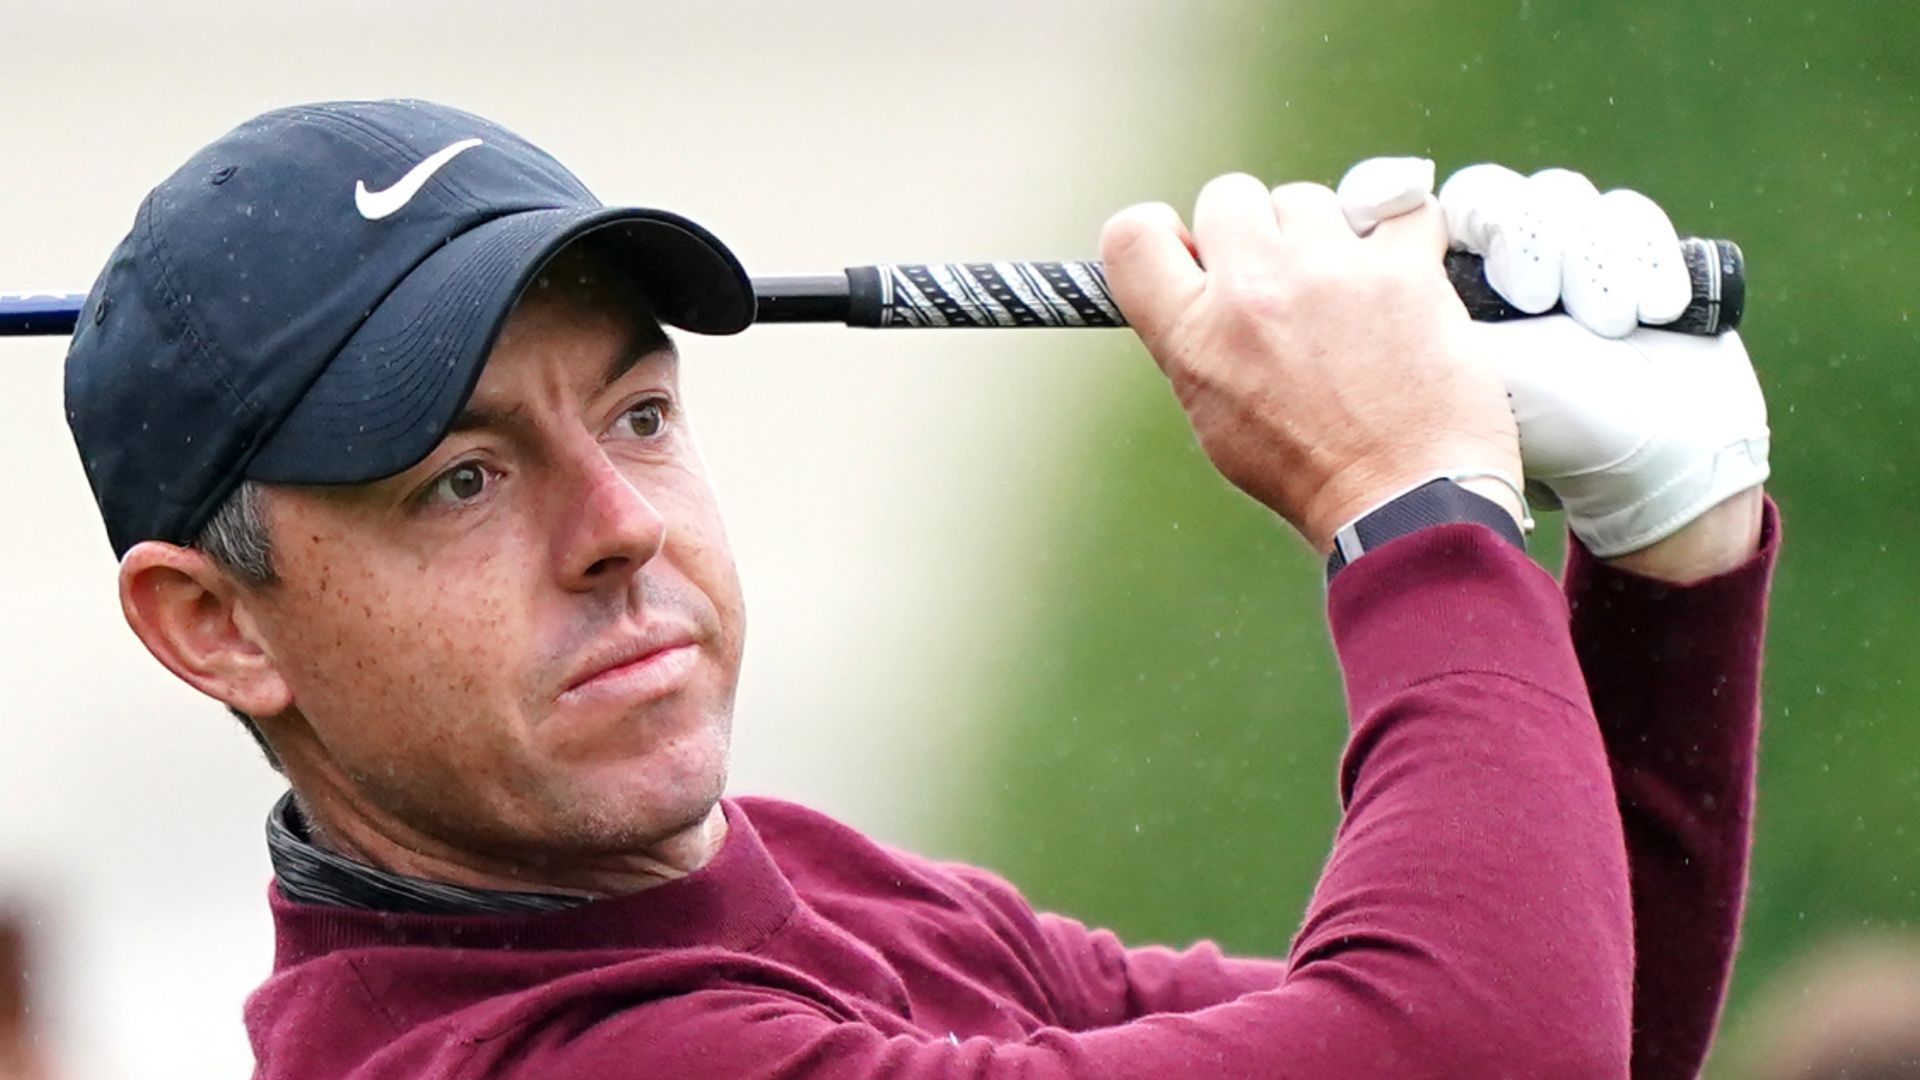 McIlroy: LIV Golf stuck 'in no man's land' compared to TGL